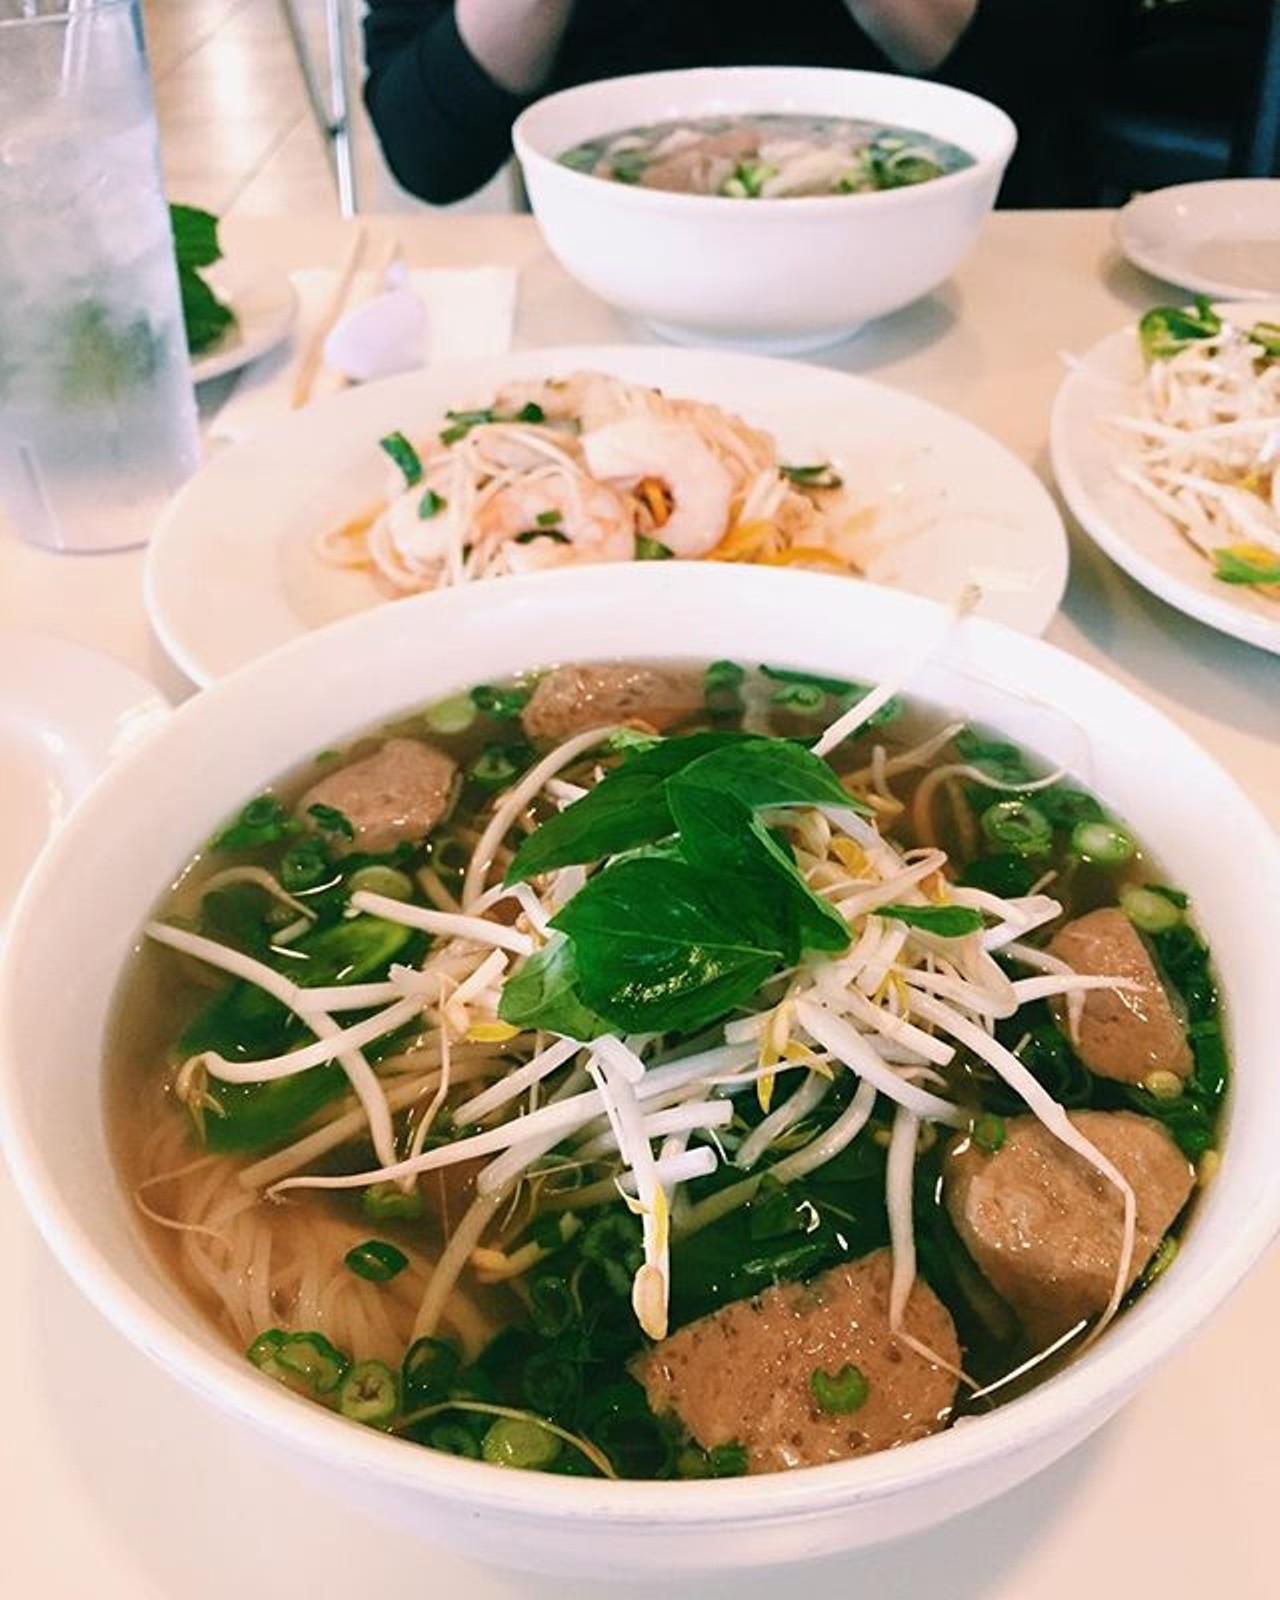 Bowl of pho from Pho 88 Vietnamese Restaurant
730 N. Mills Ave., 407-897-3488, 9728 E. Colonial Dr., 407-930-7670
The family-owned restaurant has a variety of Vietnamese meals, but their popular pho bowls are a must-get.
Photo via joycekwak/Instagram